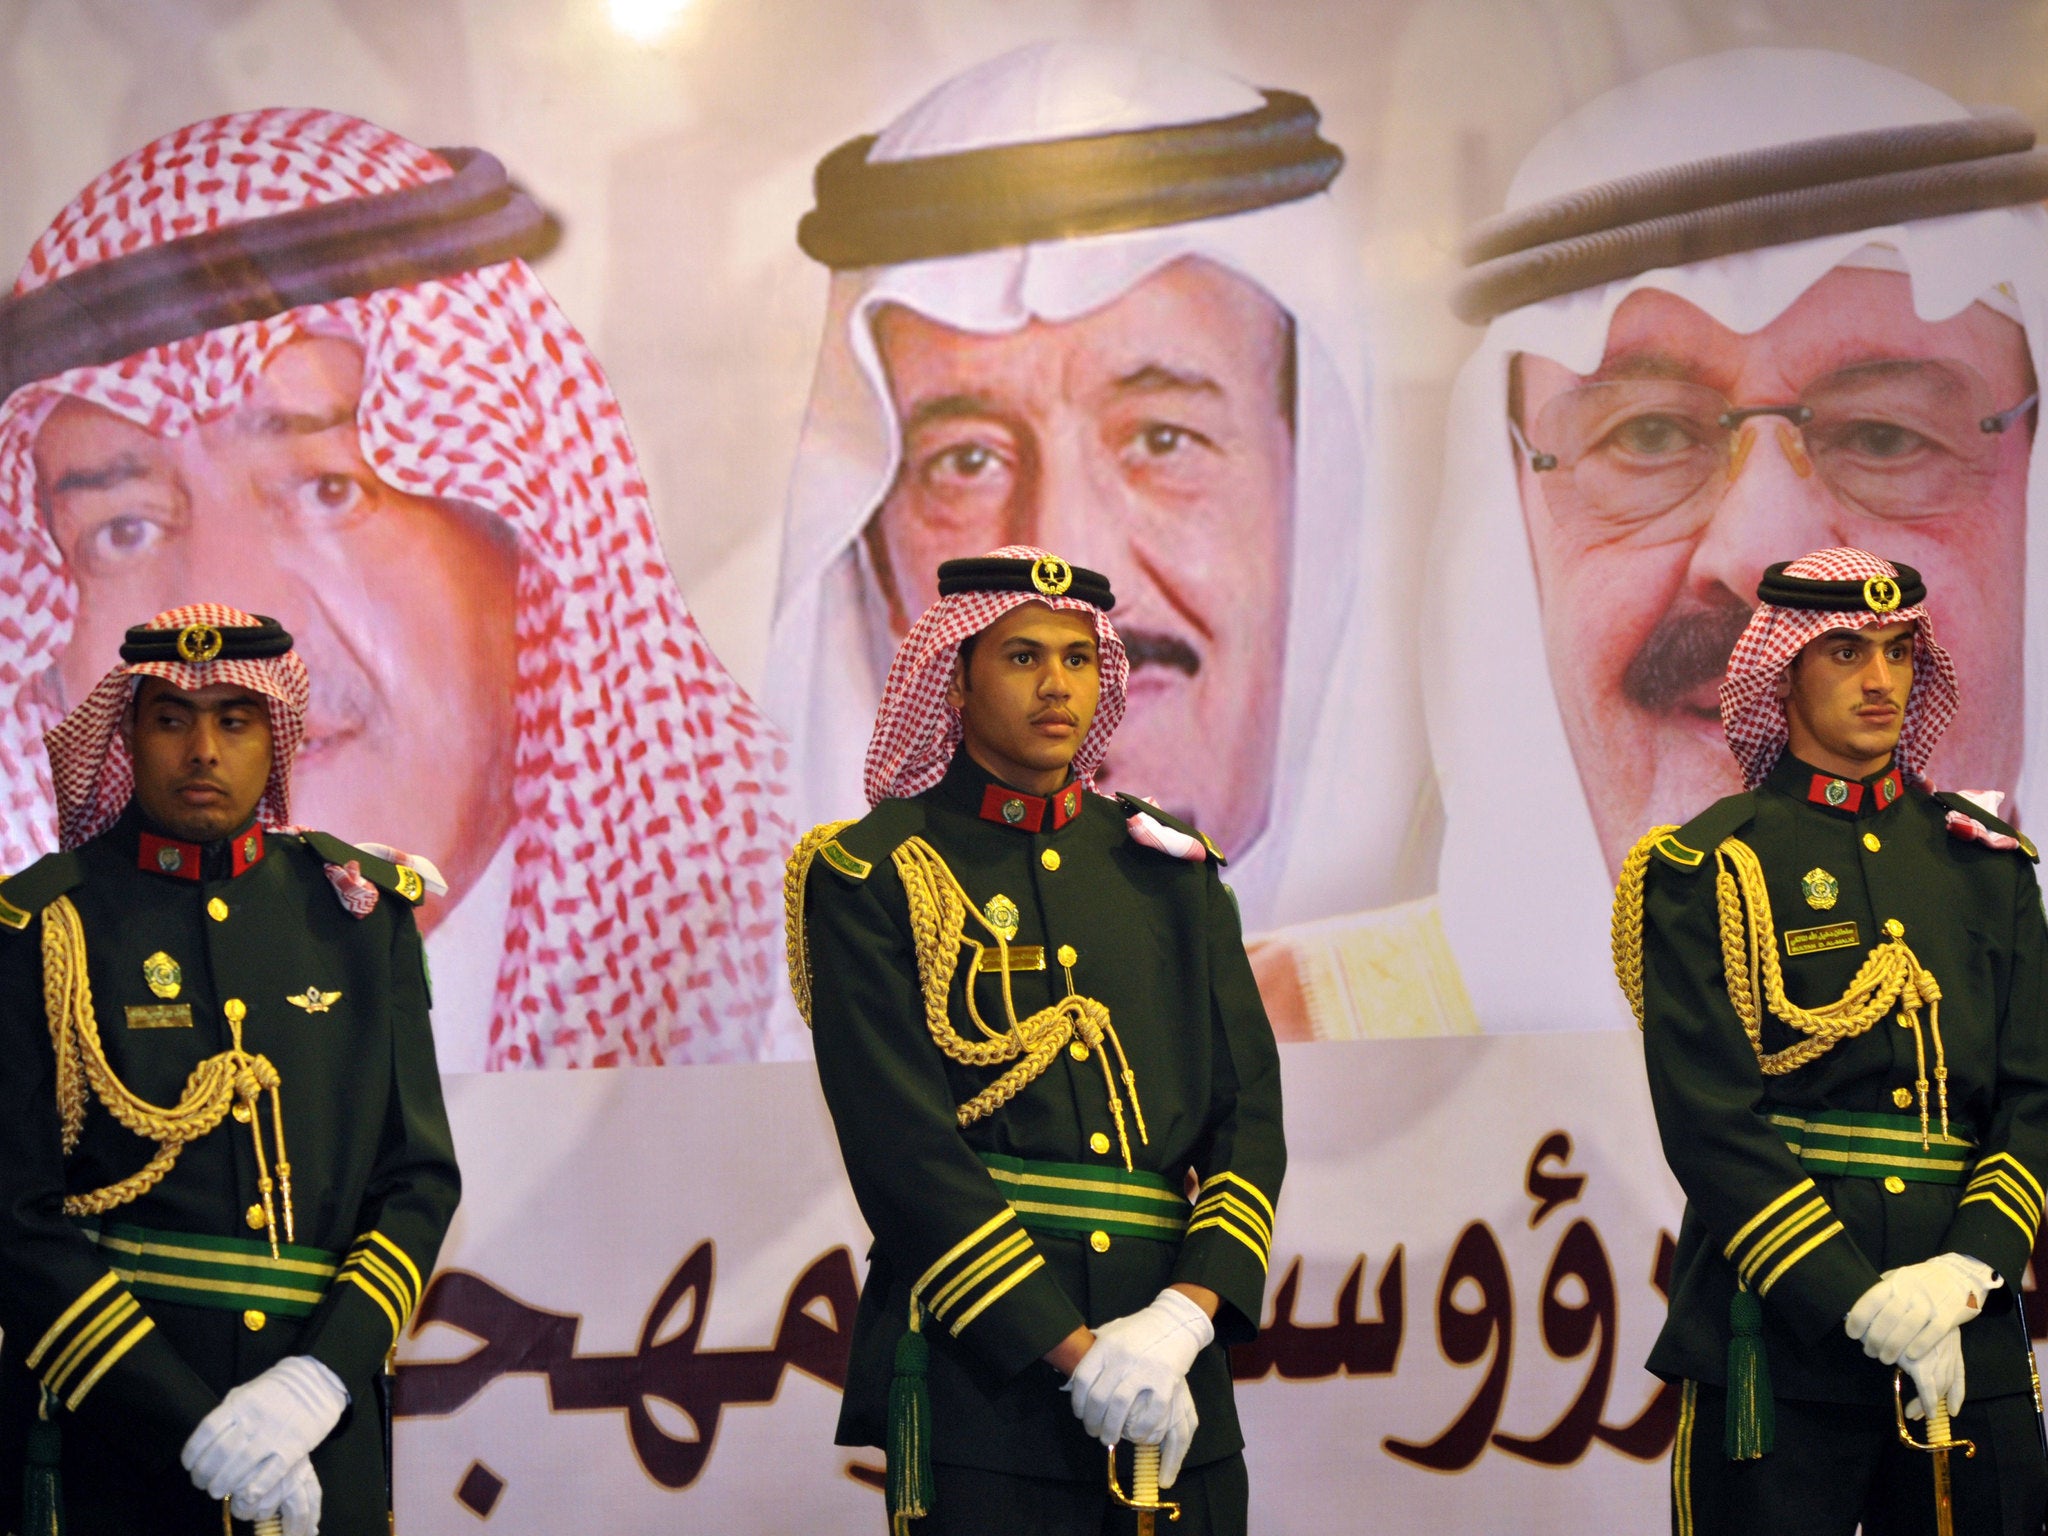 Saudi Arabia is an autocratic monarchy with a poor human rights record